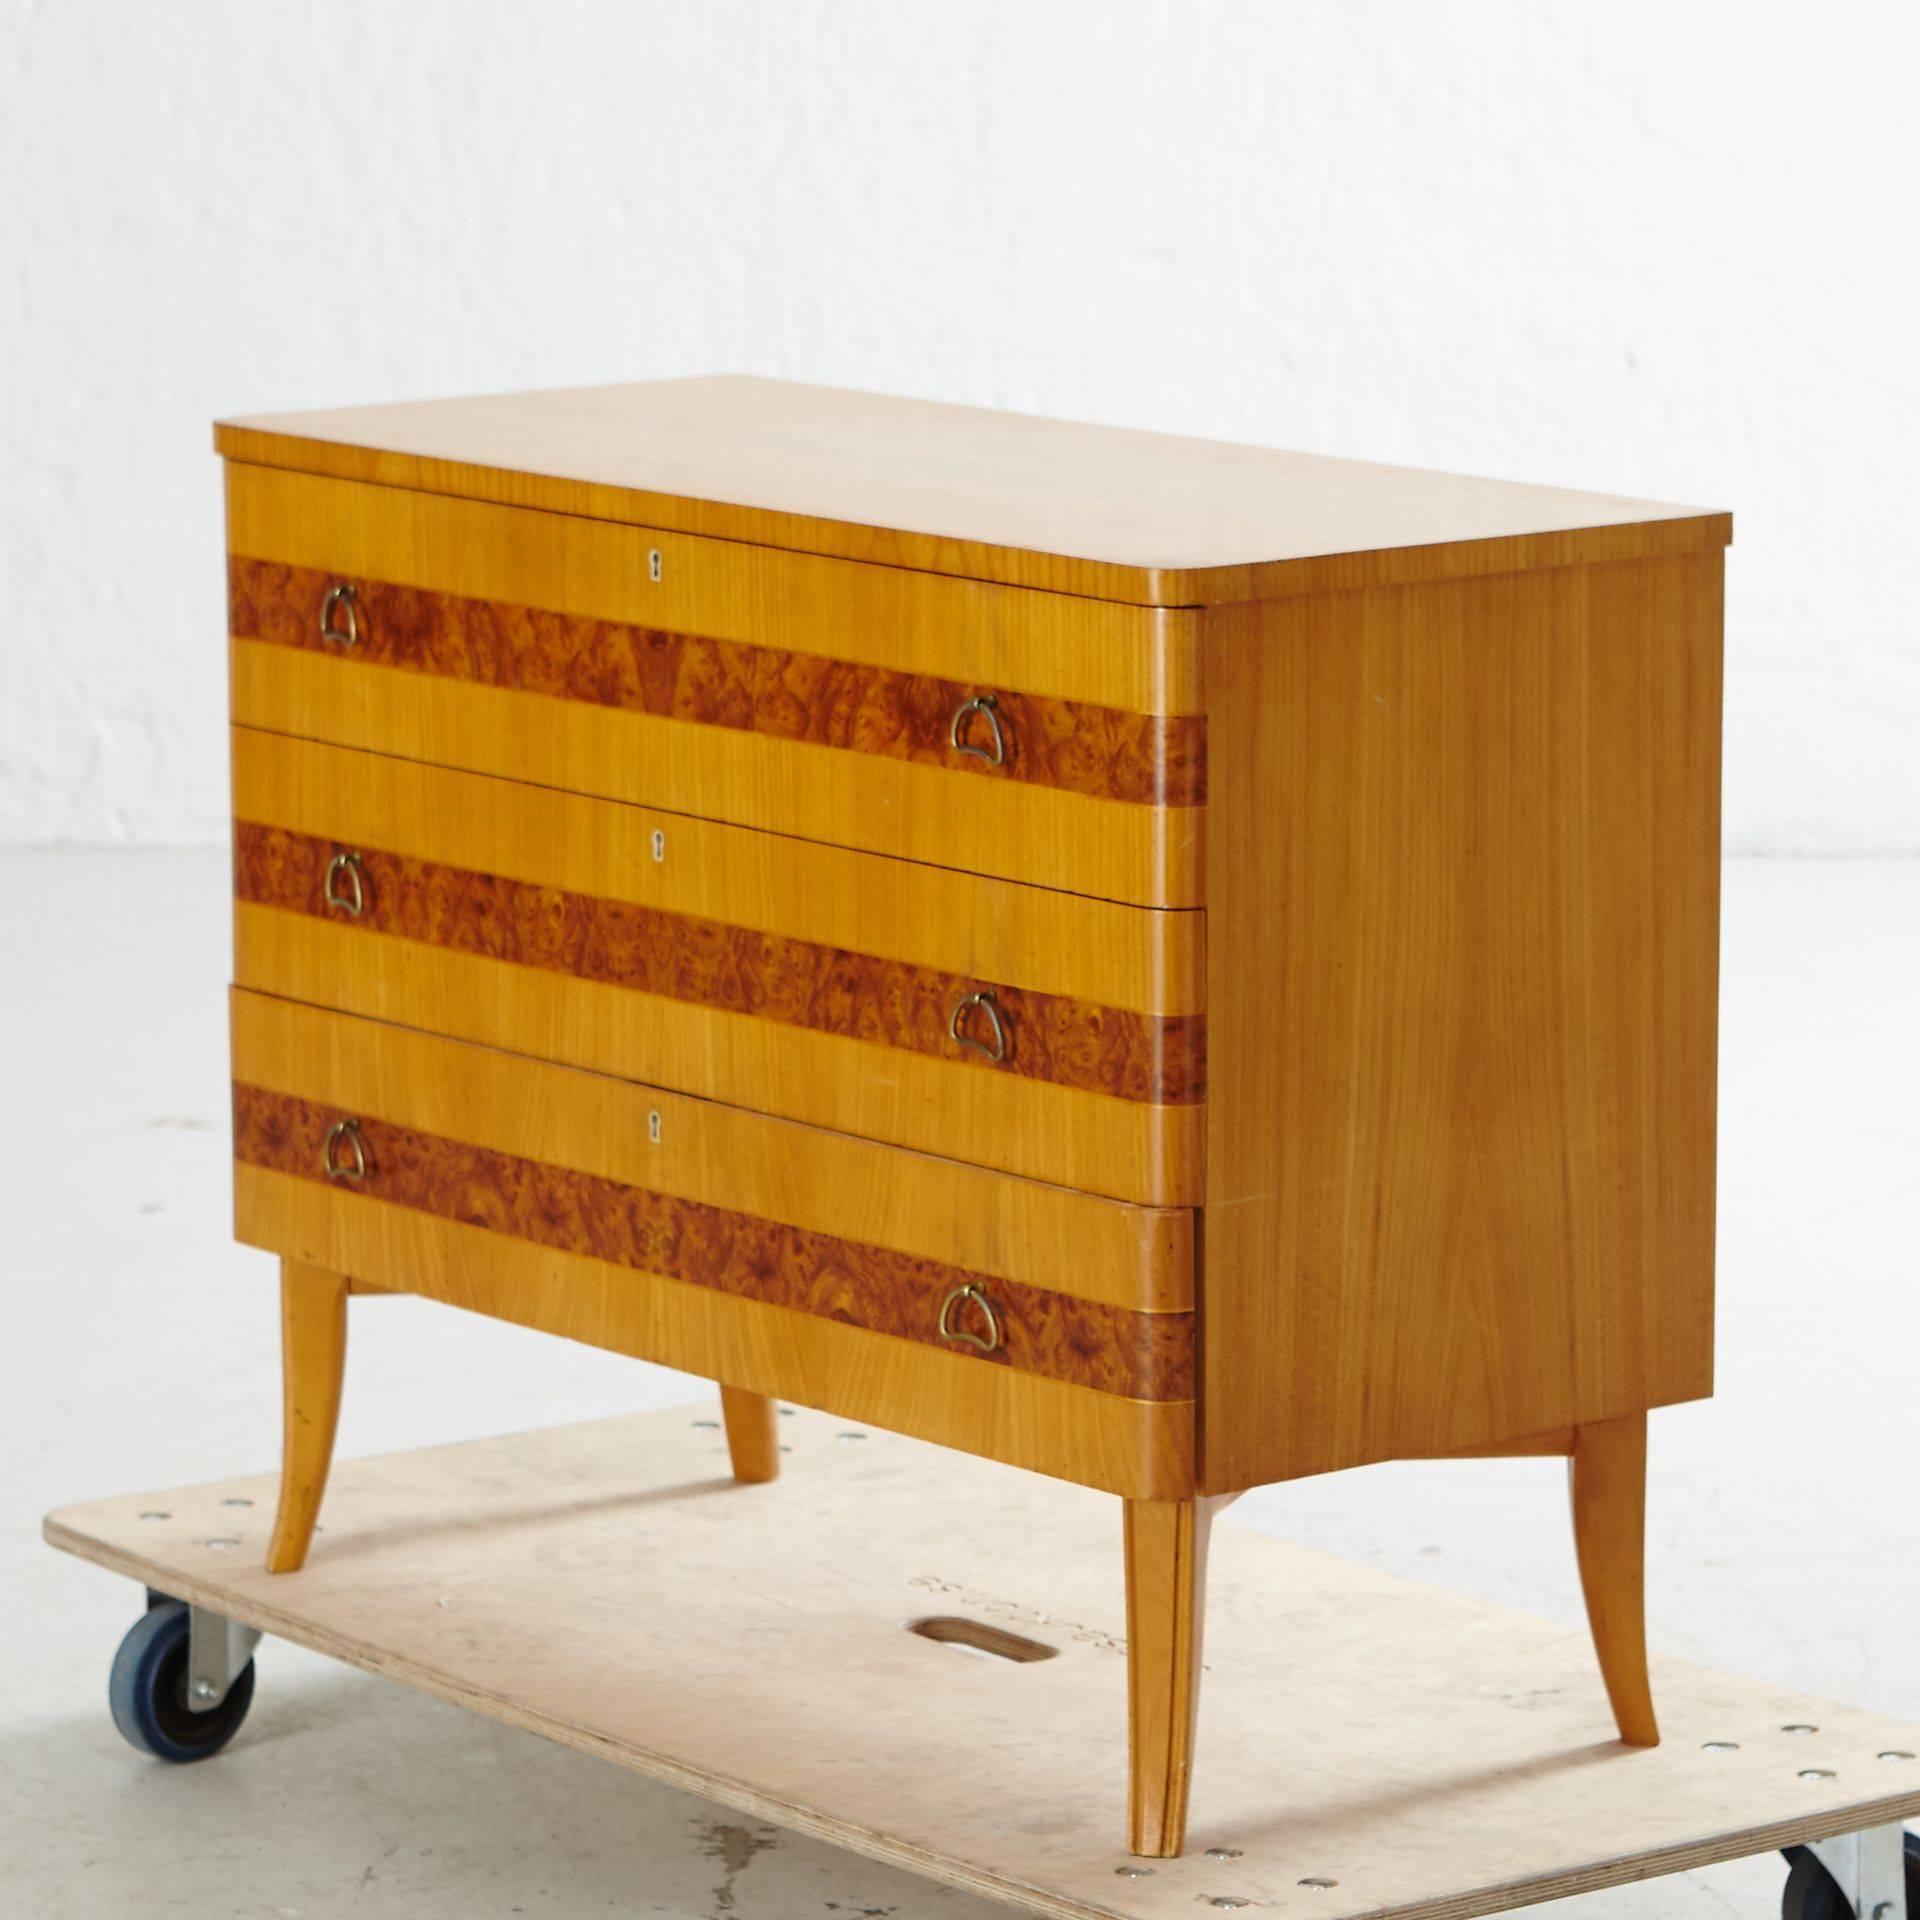 Swedish art moderne three-drawer dresser in elm and Carpathian elm. Original metal pulls. Four saber legs. Original key. Restored and in pristine condition. Made at Bodafors in Southern Sweden in the 1940s.